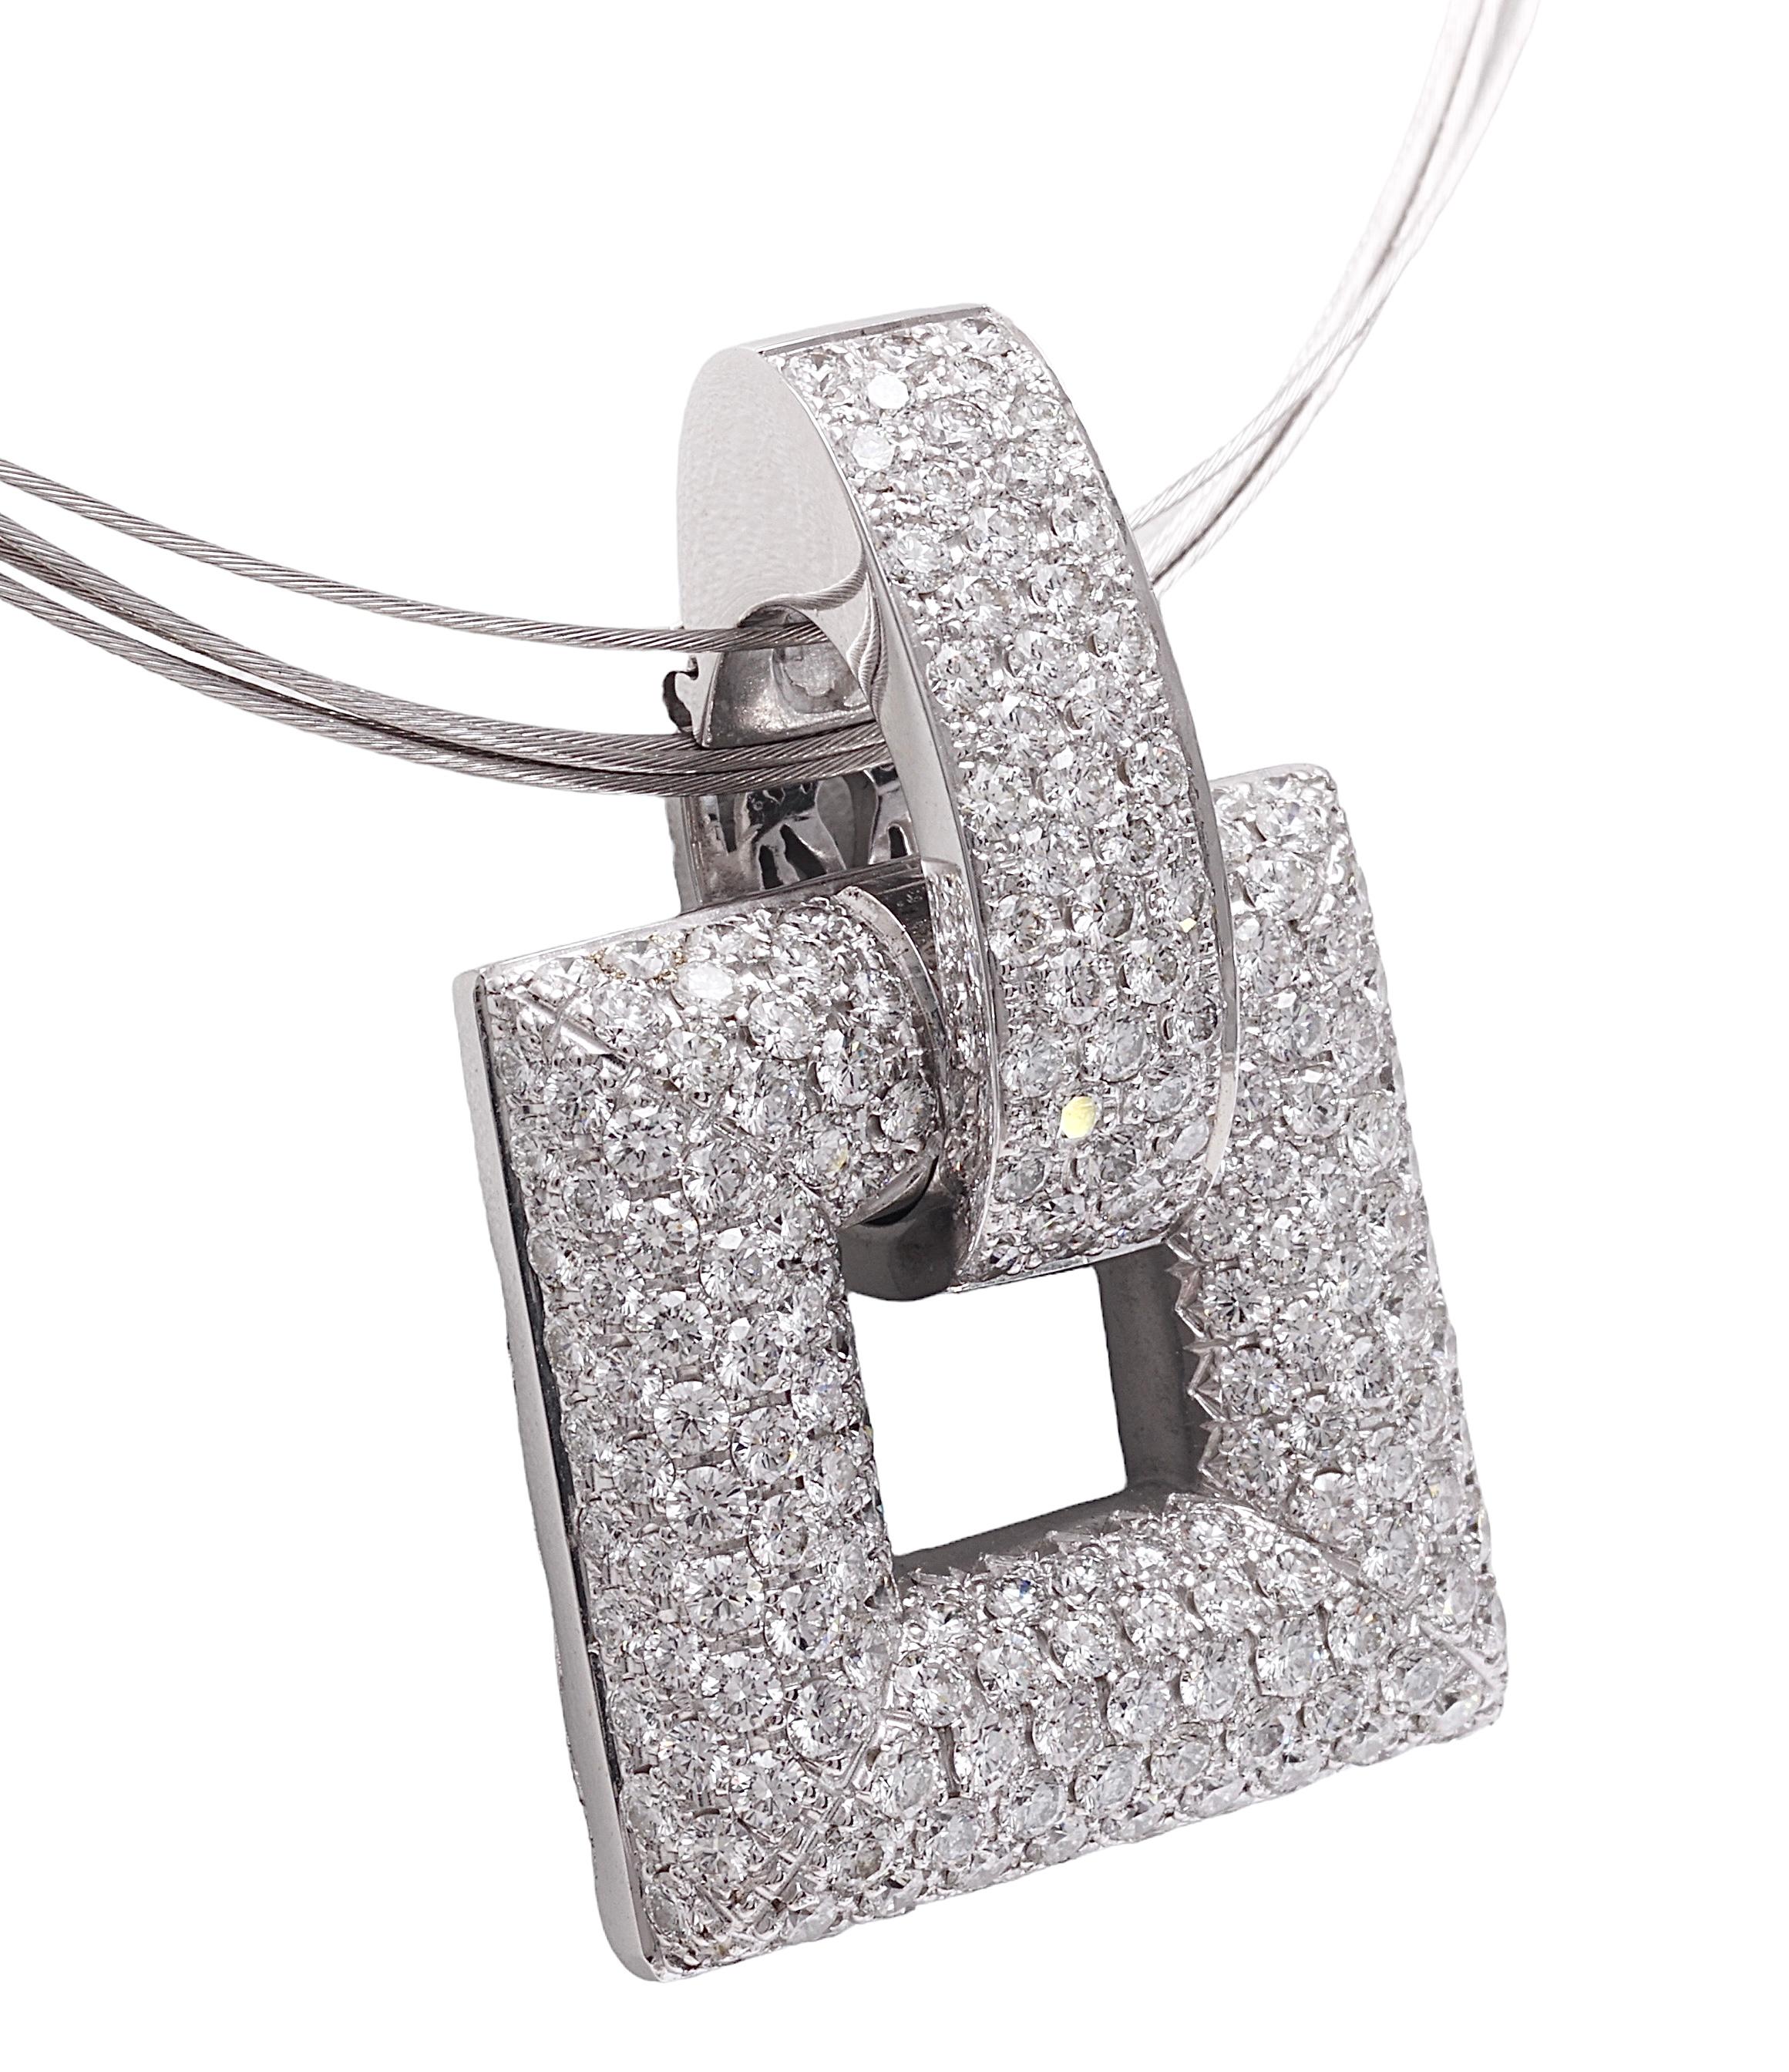 Stunning 18 kt white gold Pendant with 4.16 ct. Diamonds, 18 kt. Gold Multi strand Necklace

Diamonds: Brilliant cut diamonds together 5.75 ct.

Material: 18 kt white gold

Measurements: Pendant 24.5 mm x 37 mm x 13.8 mm
Necklace: 40 cm long

Total